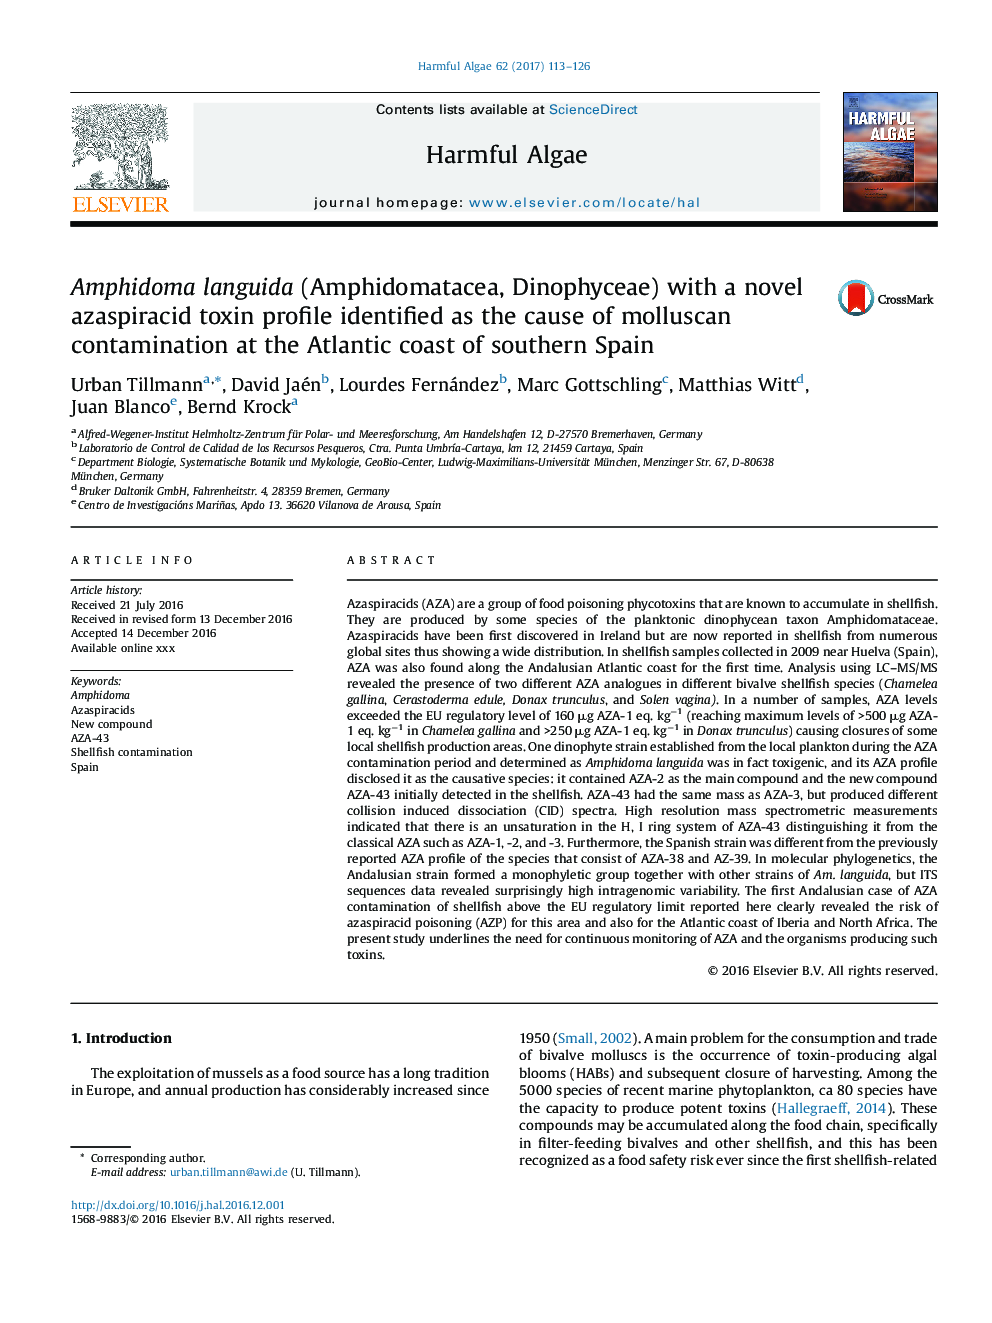 Amphidoma languida (Amphidomatacea, Dinophyceae) with a novel azaspiracid toxin profile identified as the cause of molluscan contamination at the Atlantic coast of southern Spain